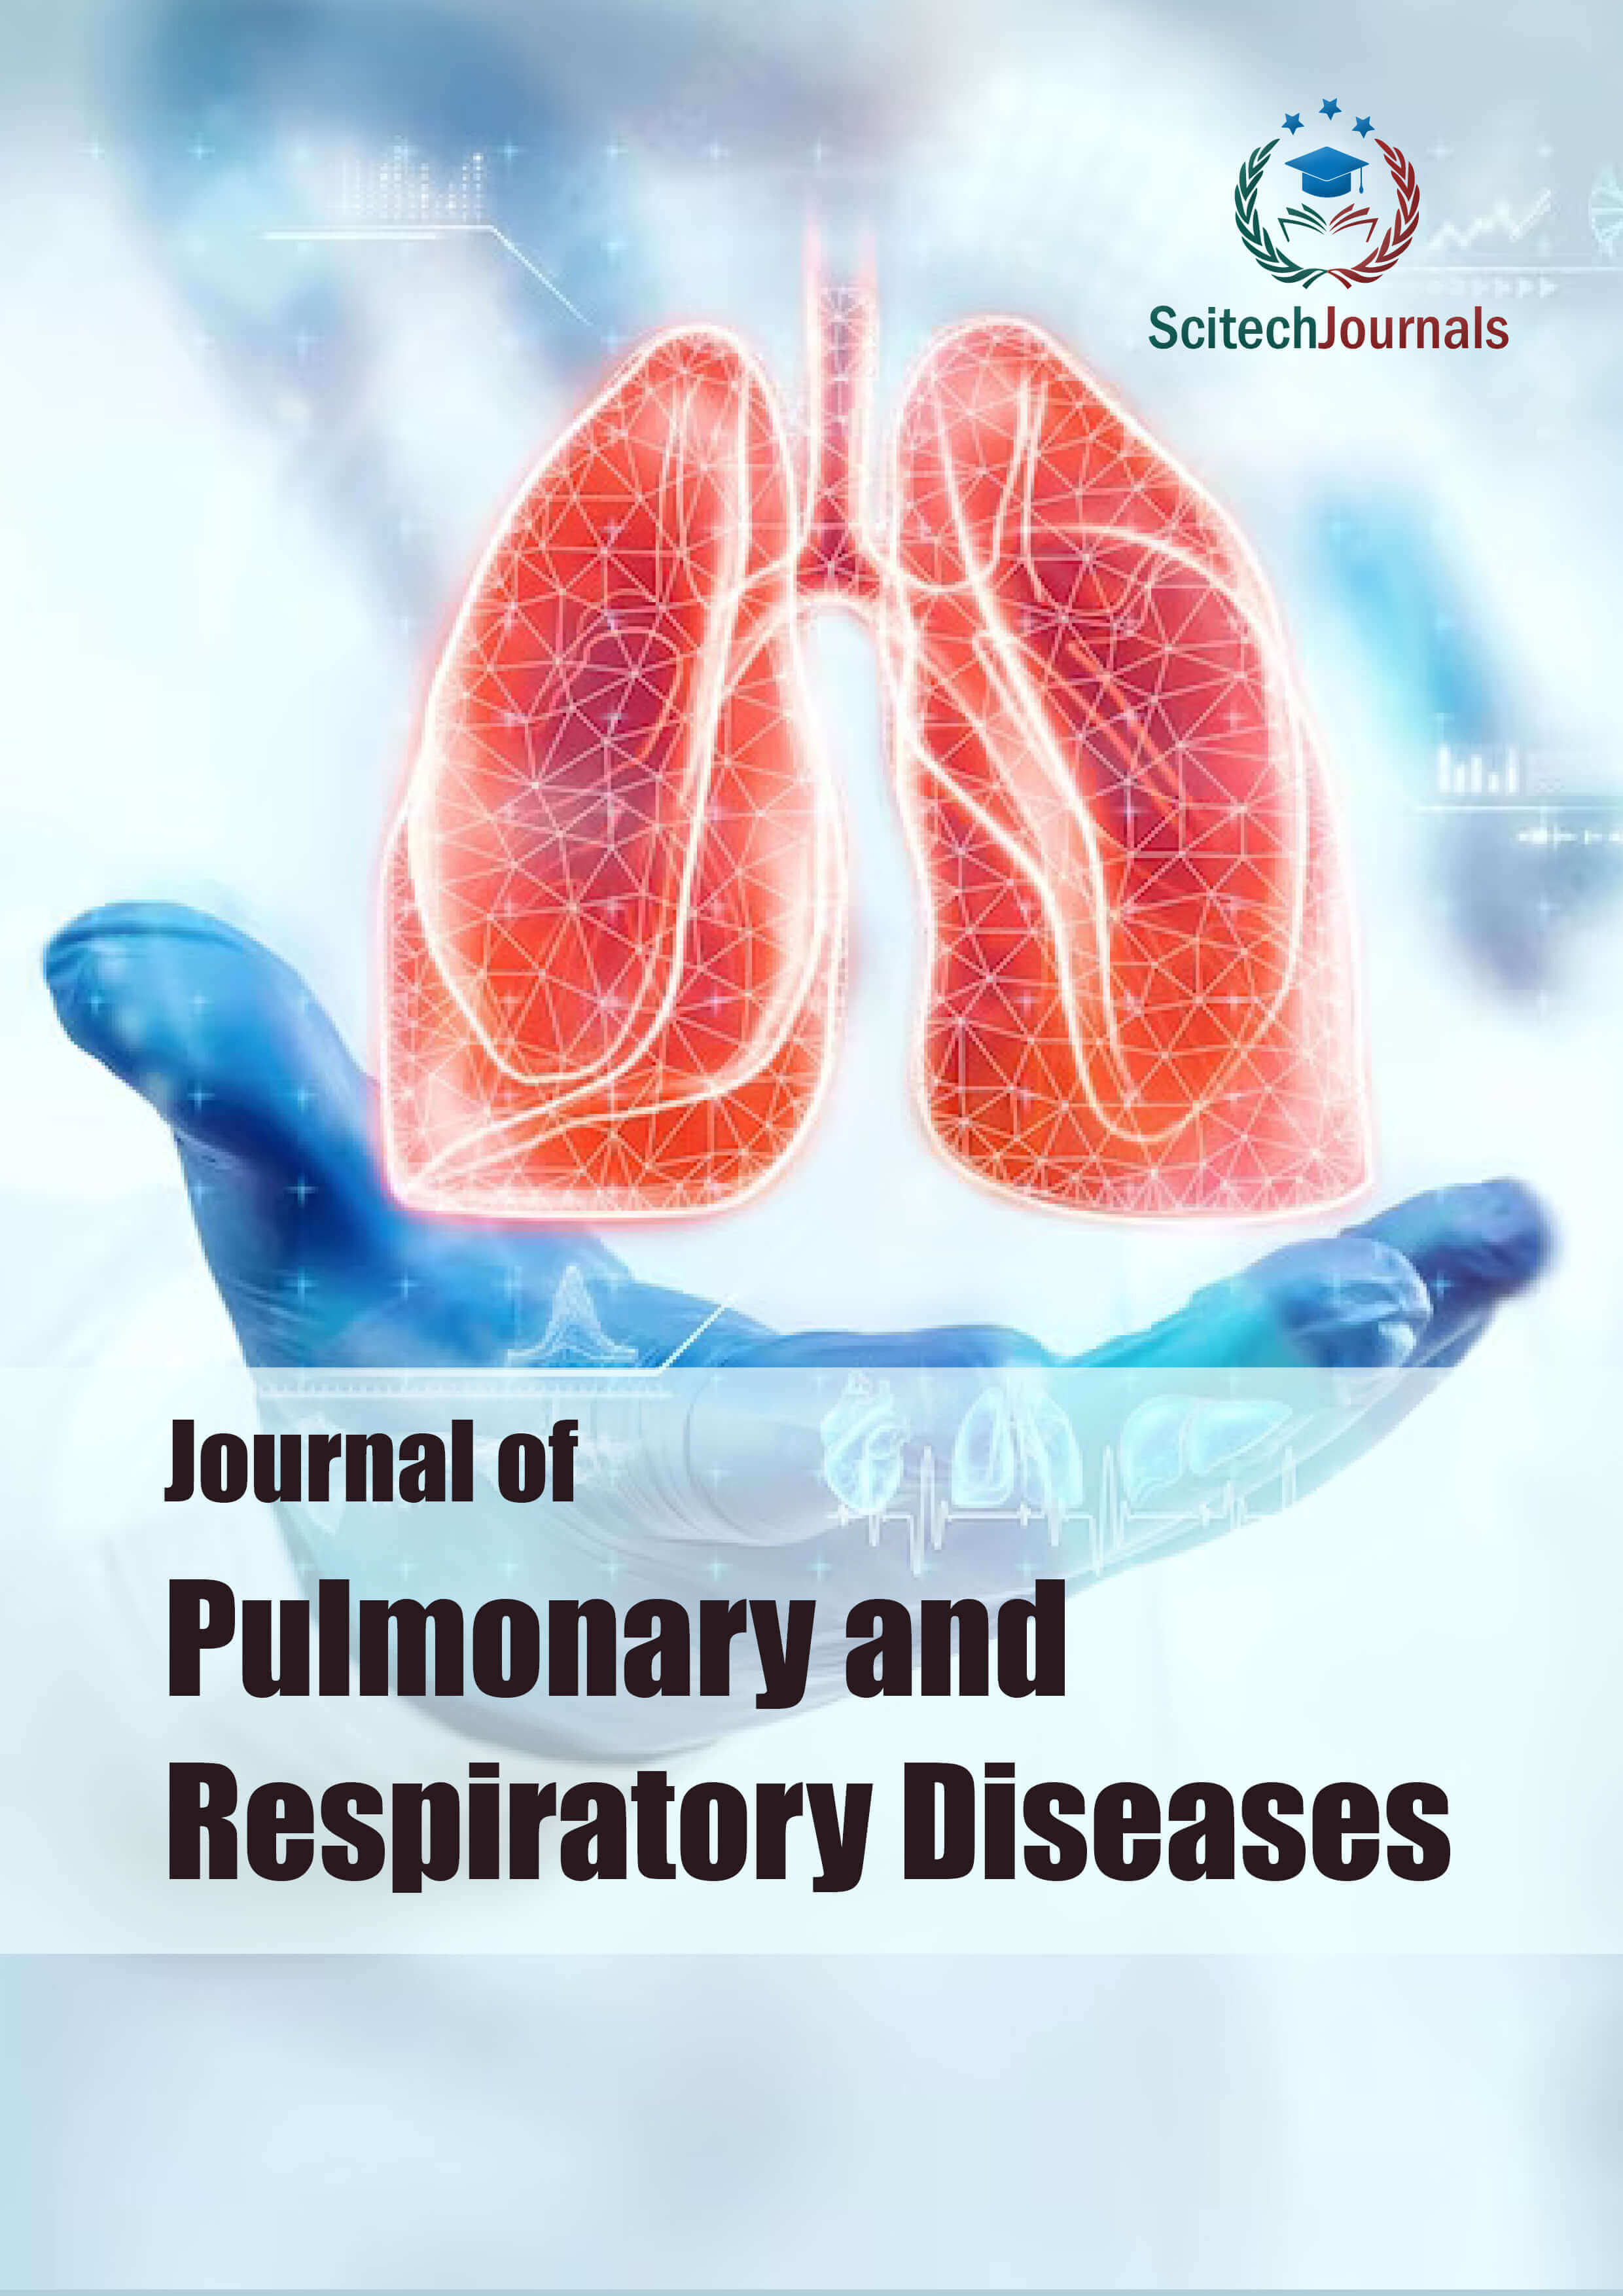 Journal of Pulmonary and Respiratory Diseases